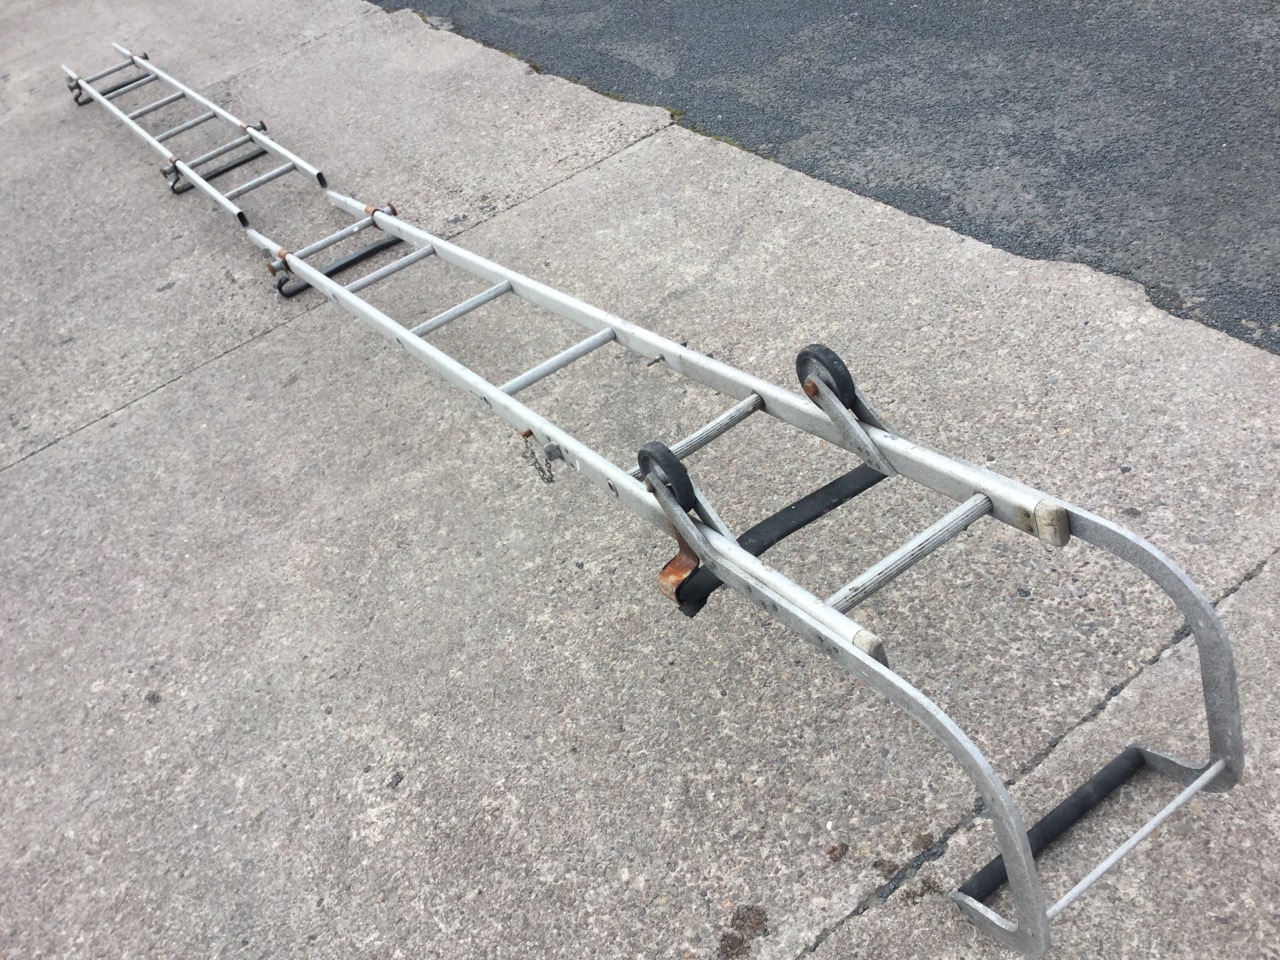 A Gravity Randall extending aluminium roof ladder with rollers and curved ridge bar, having